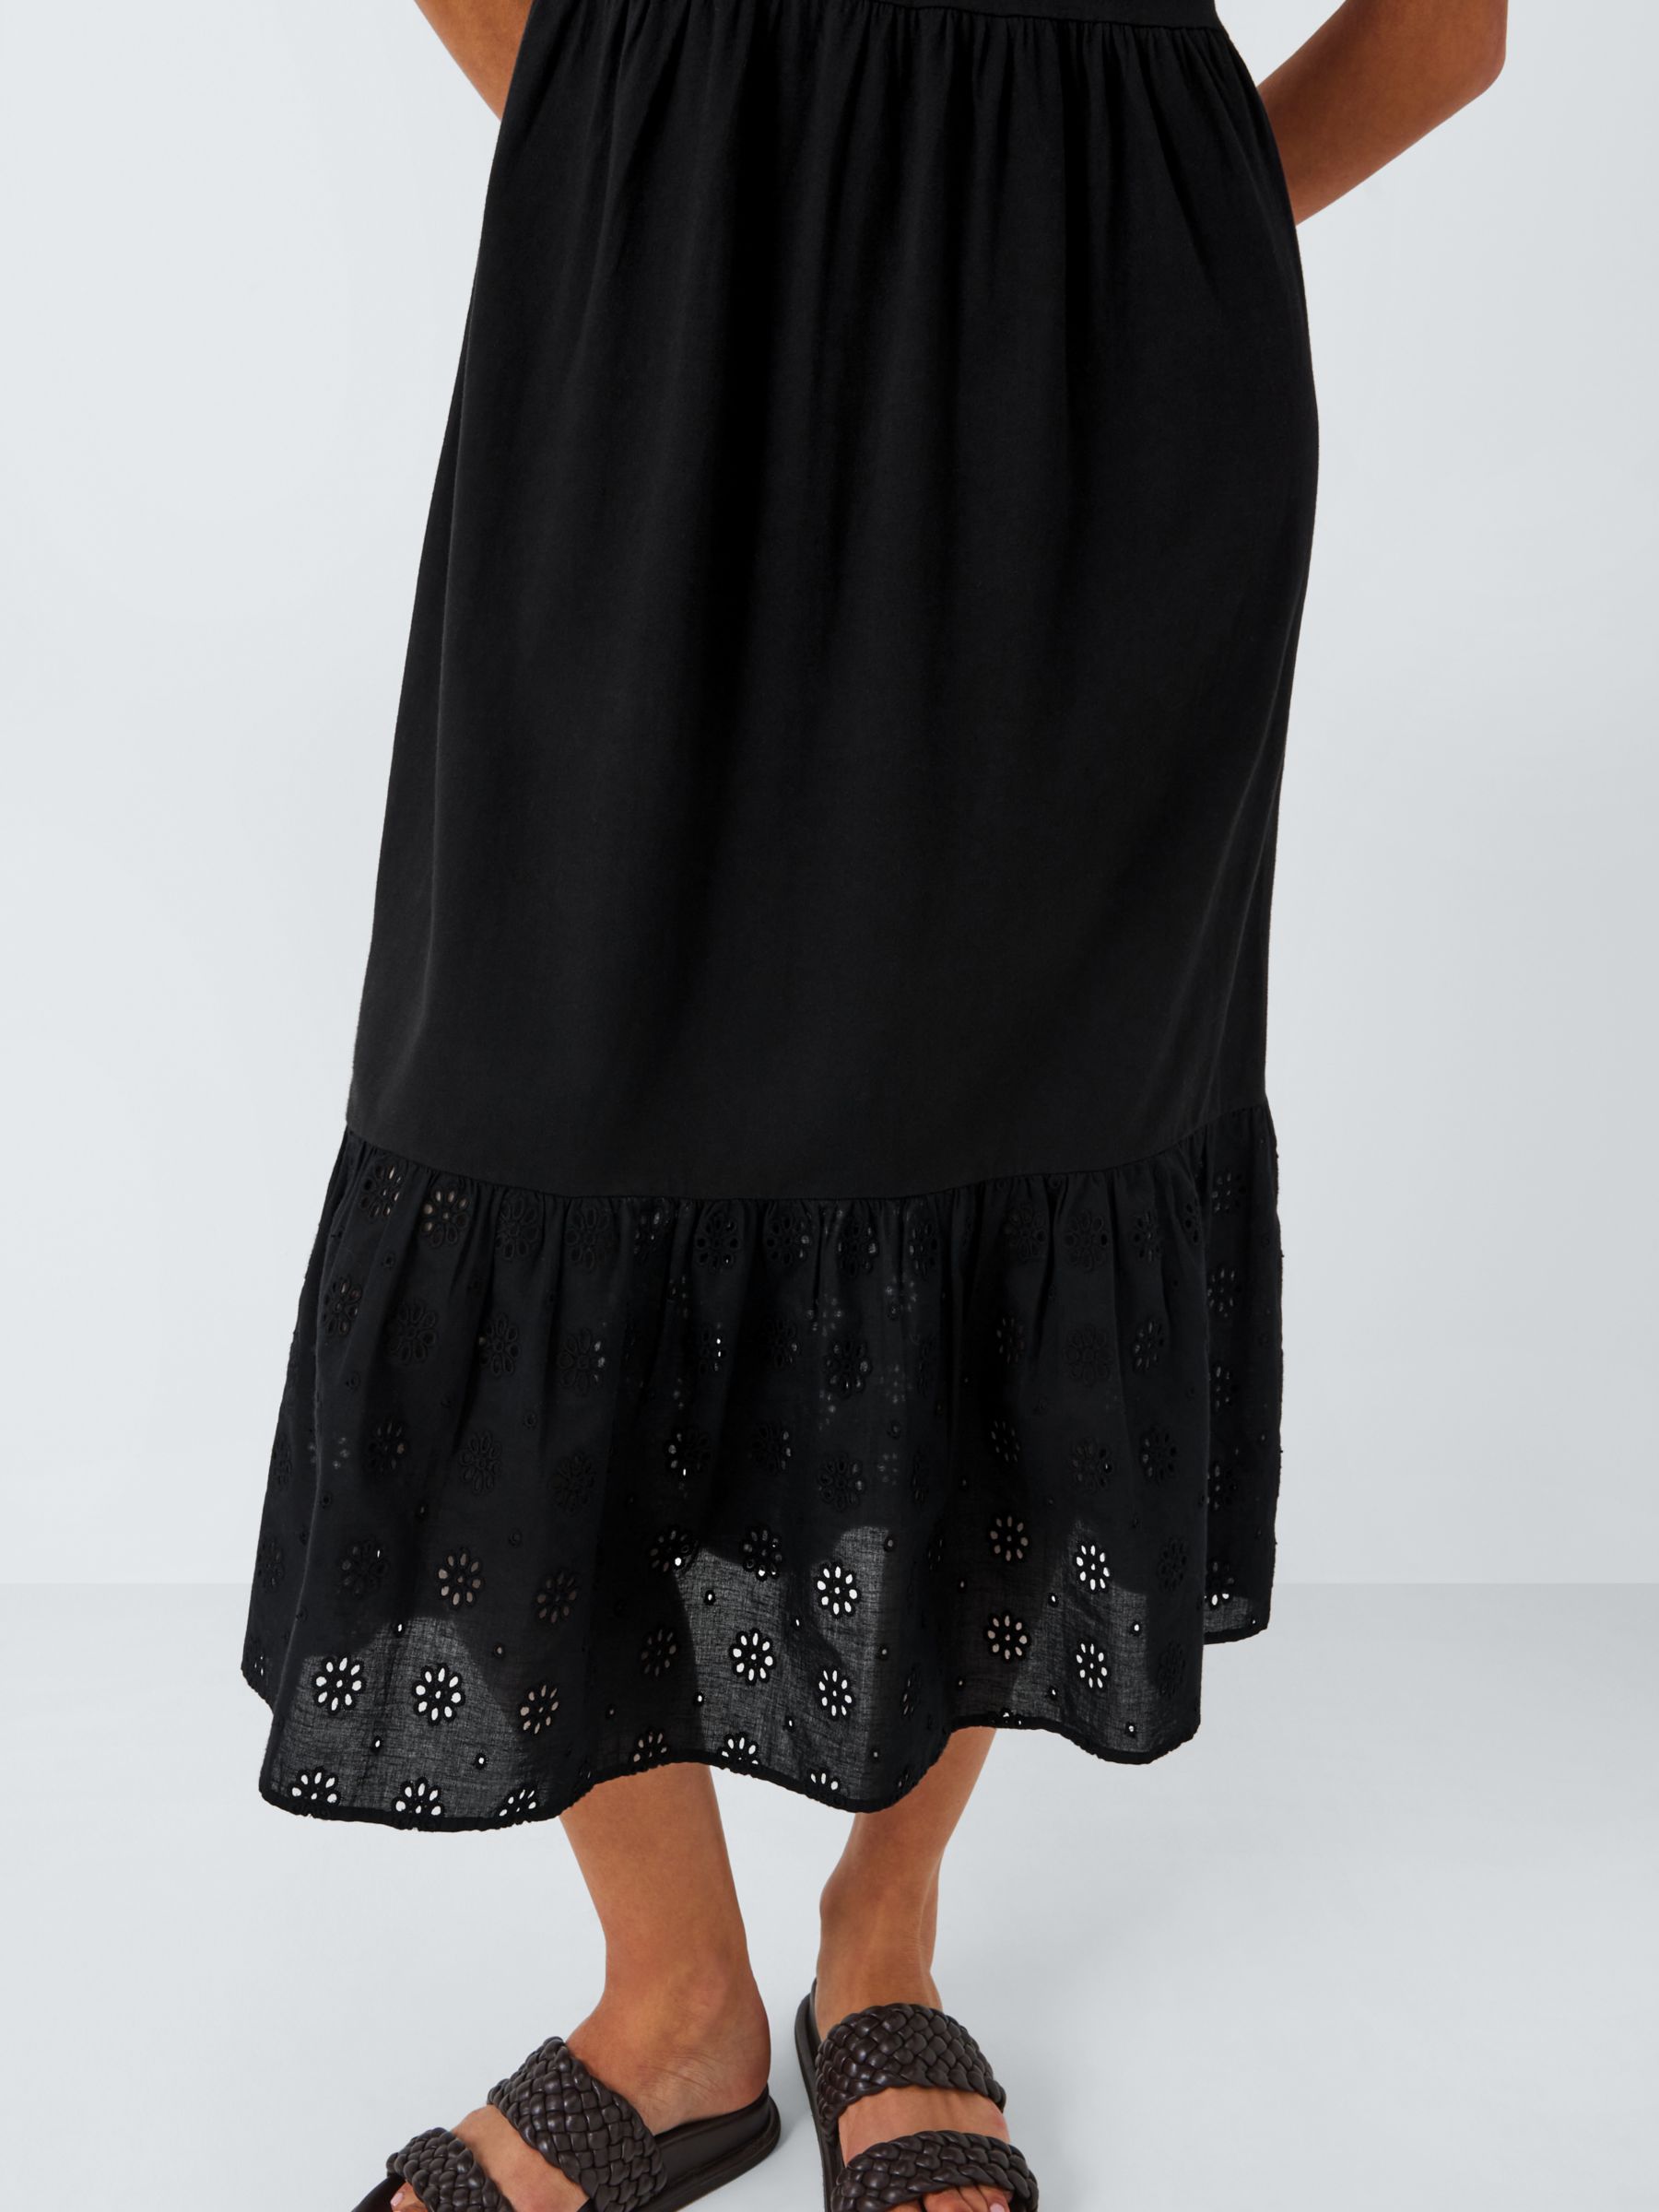 John Lewis ANYDAY Tiered Jersey Broderie Midi Dress, Black, XS